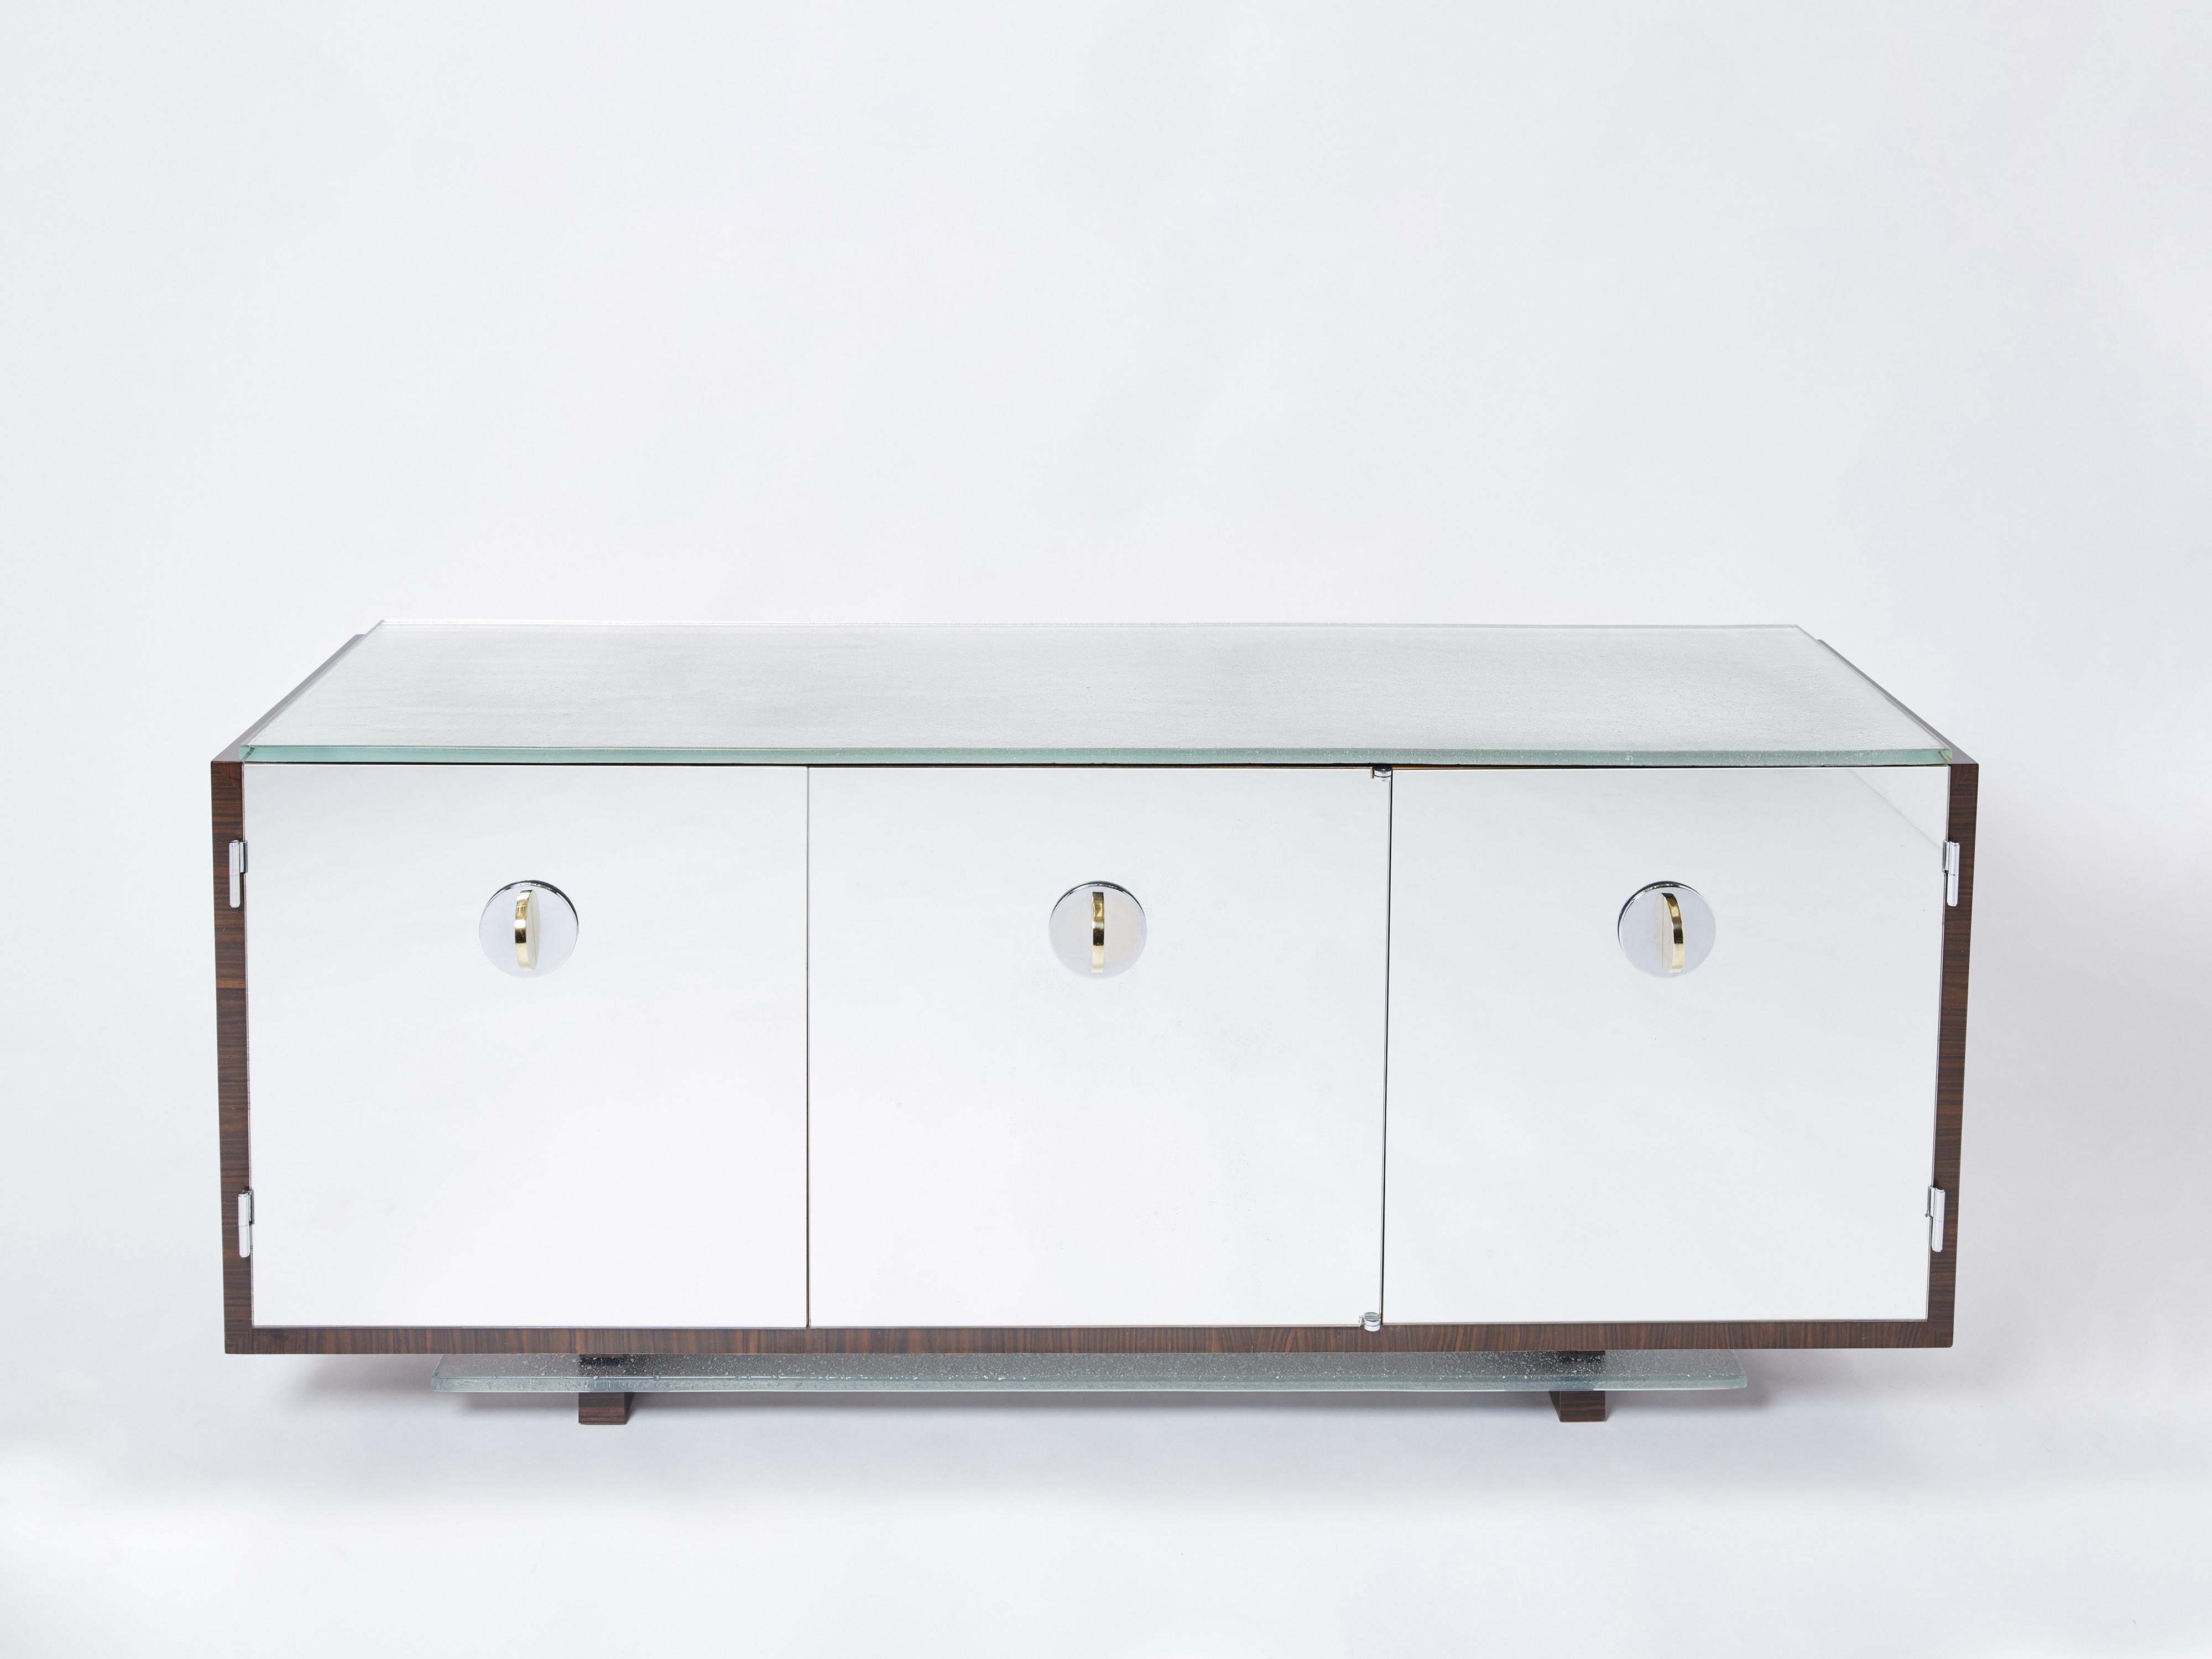 Unique sideboard commissioned by Alberto Pinto in the 1990s for the decors of an hotel particulier in Paris 16ème, inspired by Jacques Adnet’s work. This piece is an exquisite example of refined, highly detailed and very well made furniture by